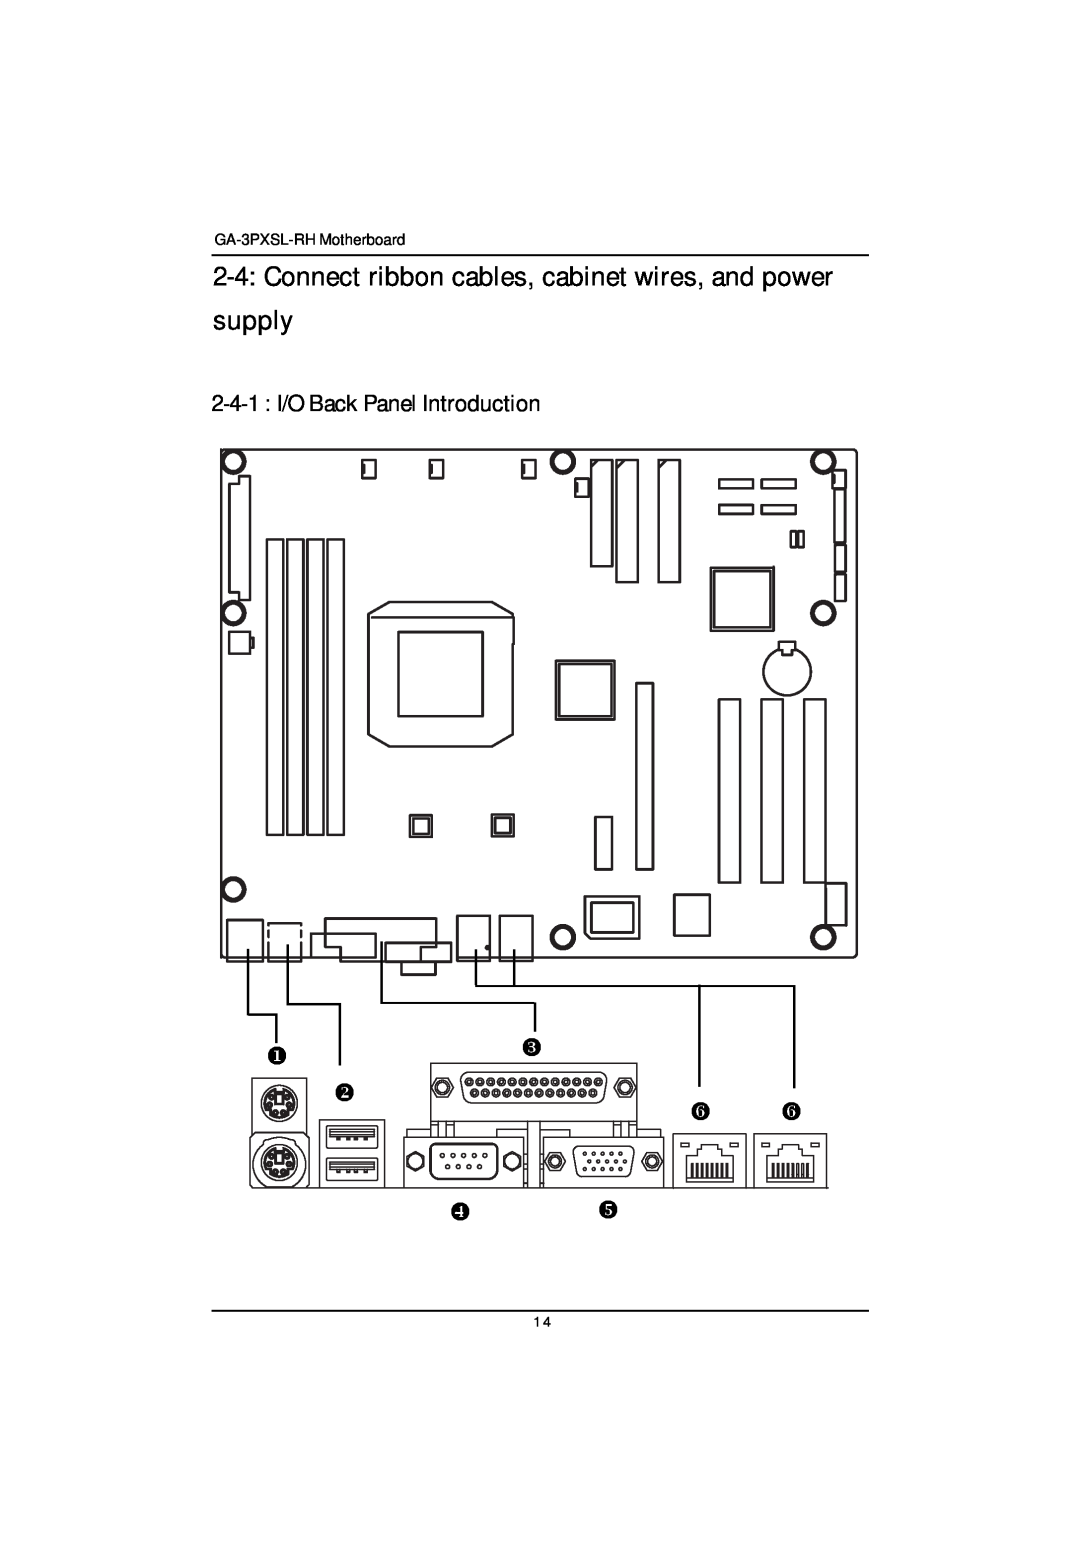 Gigabyte GA-3PXSL-RH user manual Connect ribbon cables, cabinet wires, and power supply, 2-4-1 I/O Back Panel Introduction 